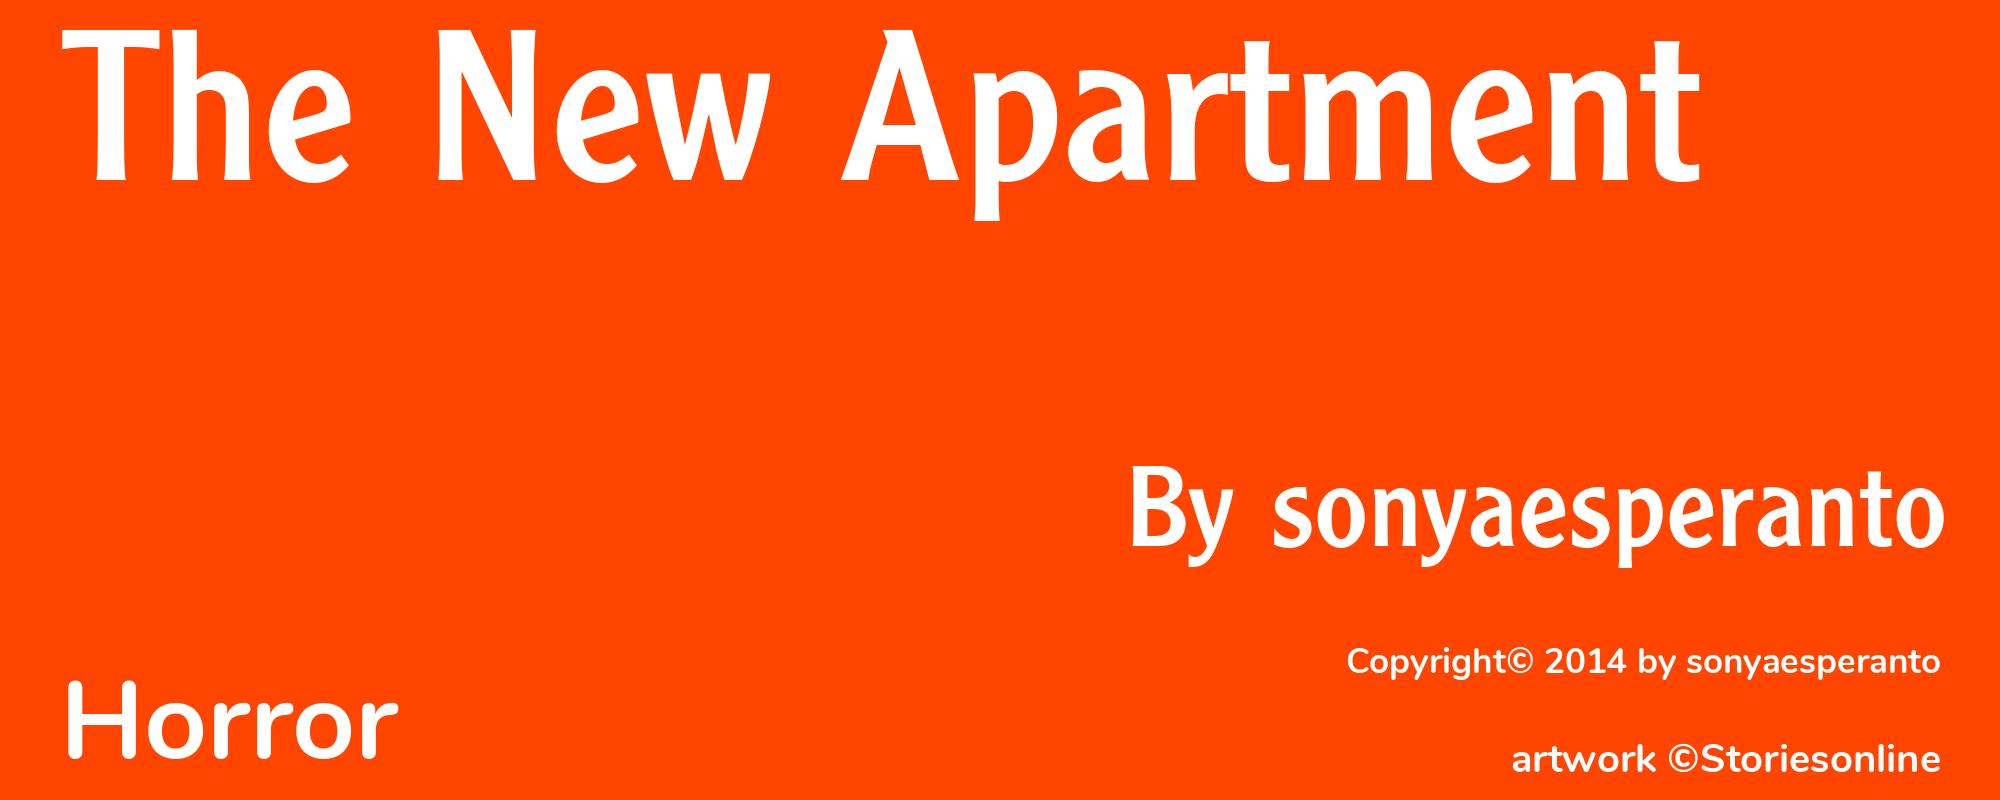 The New Apartment - Cover